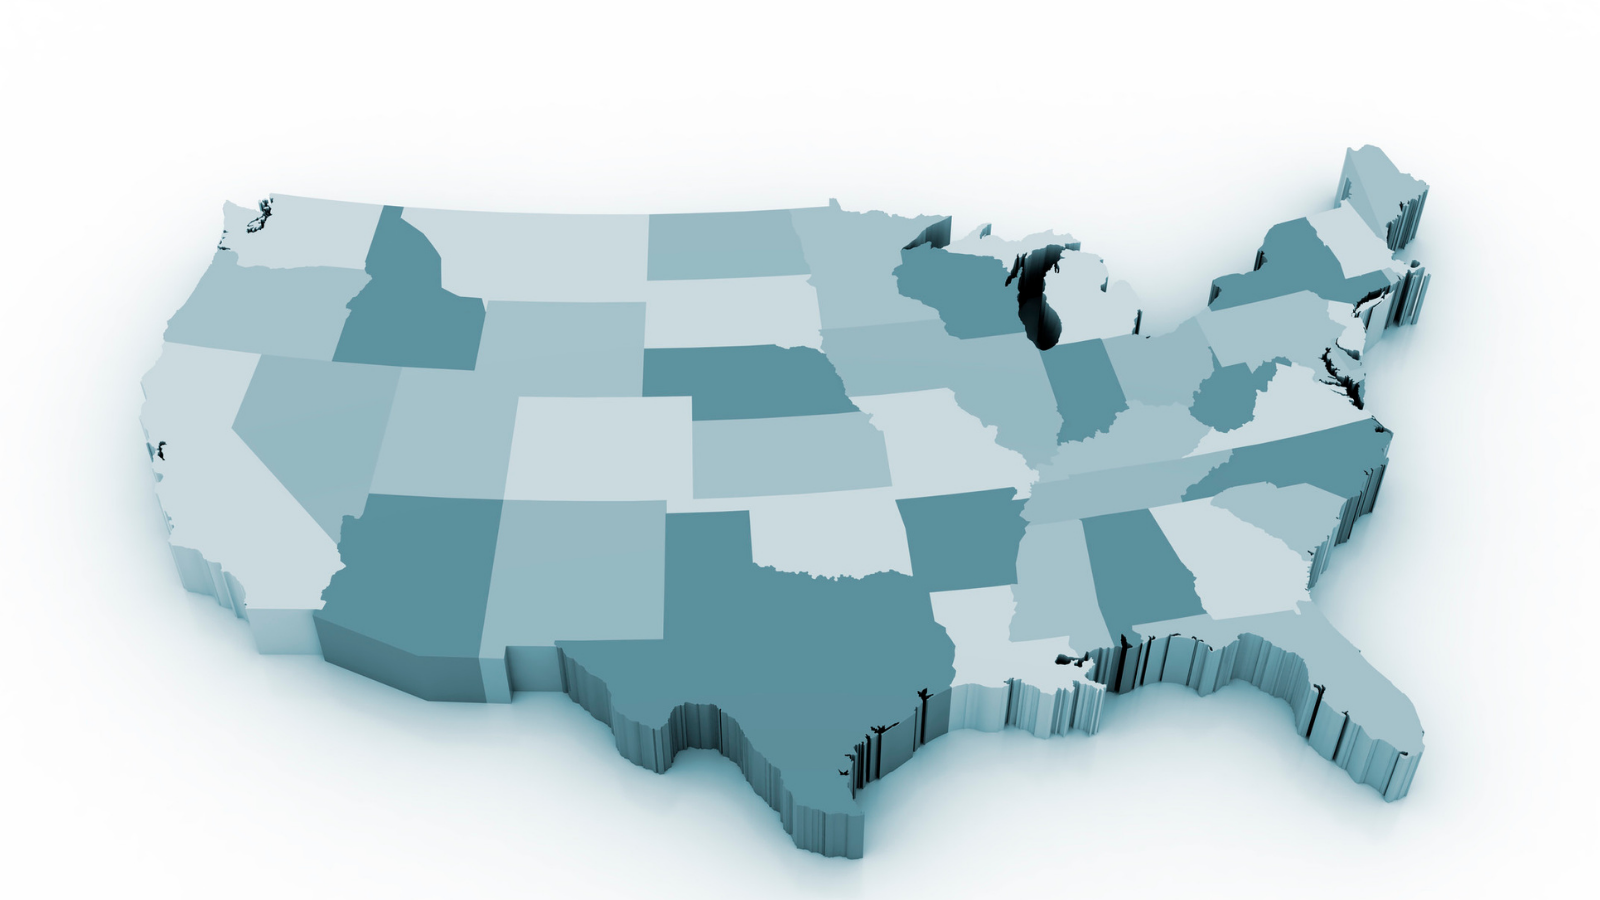 stock image of U.S. map with states shaded differently